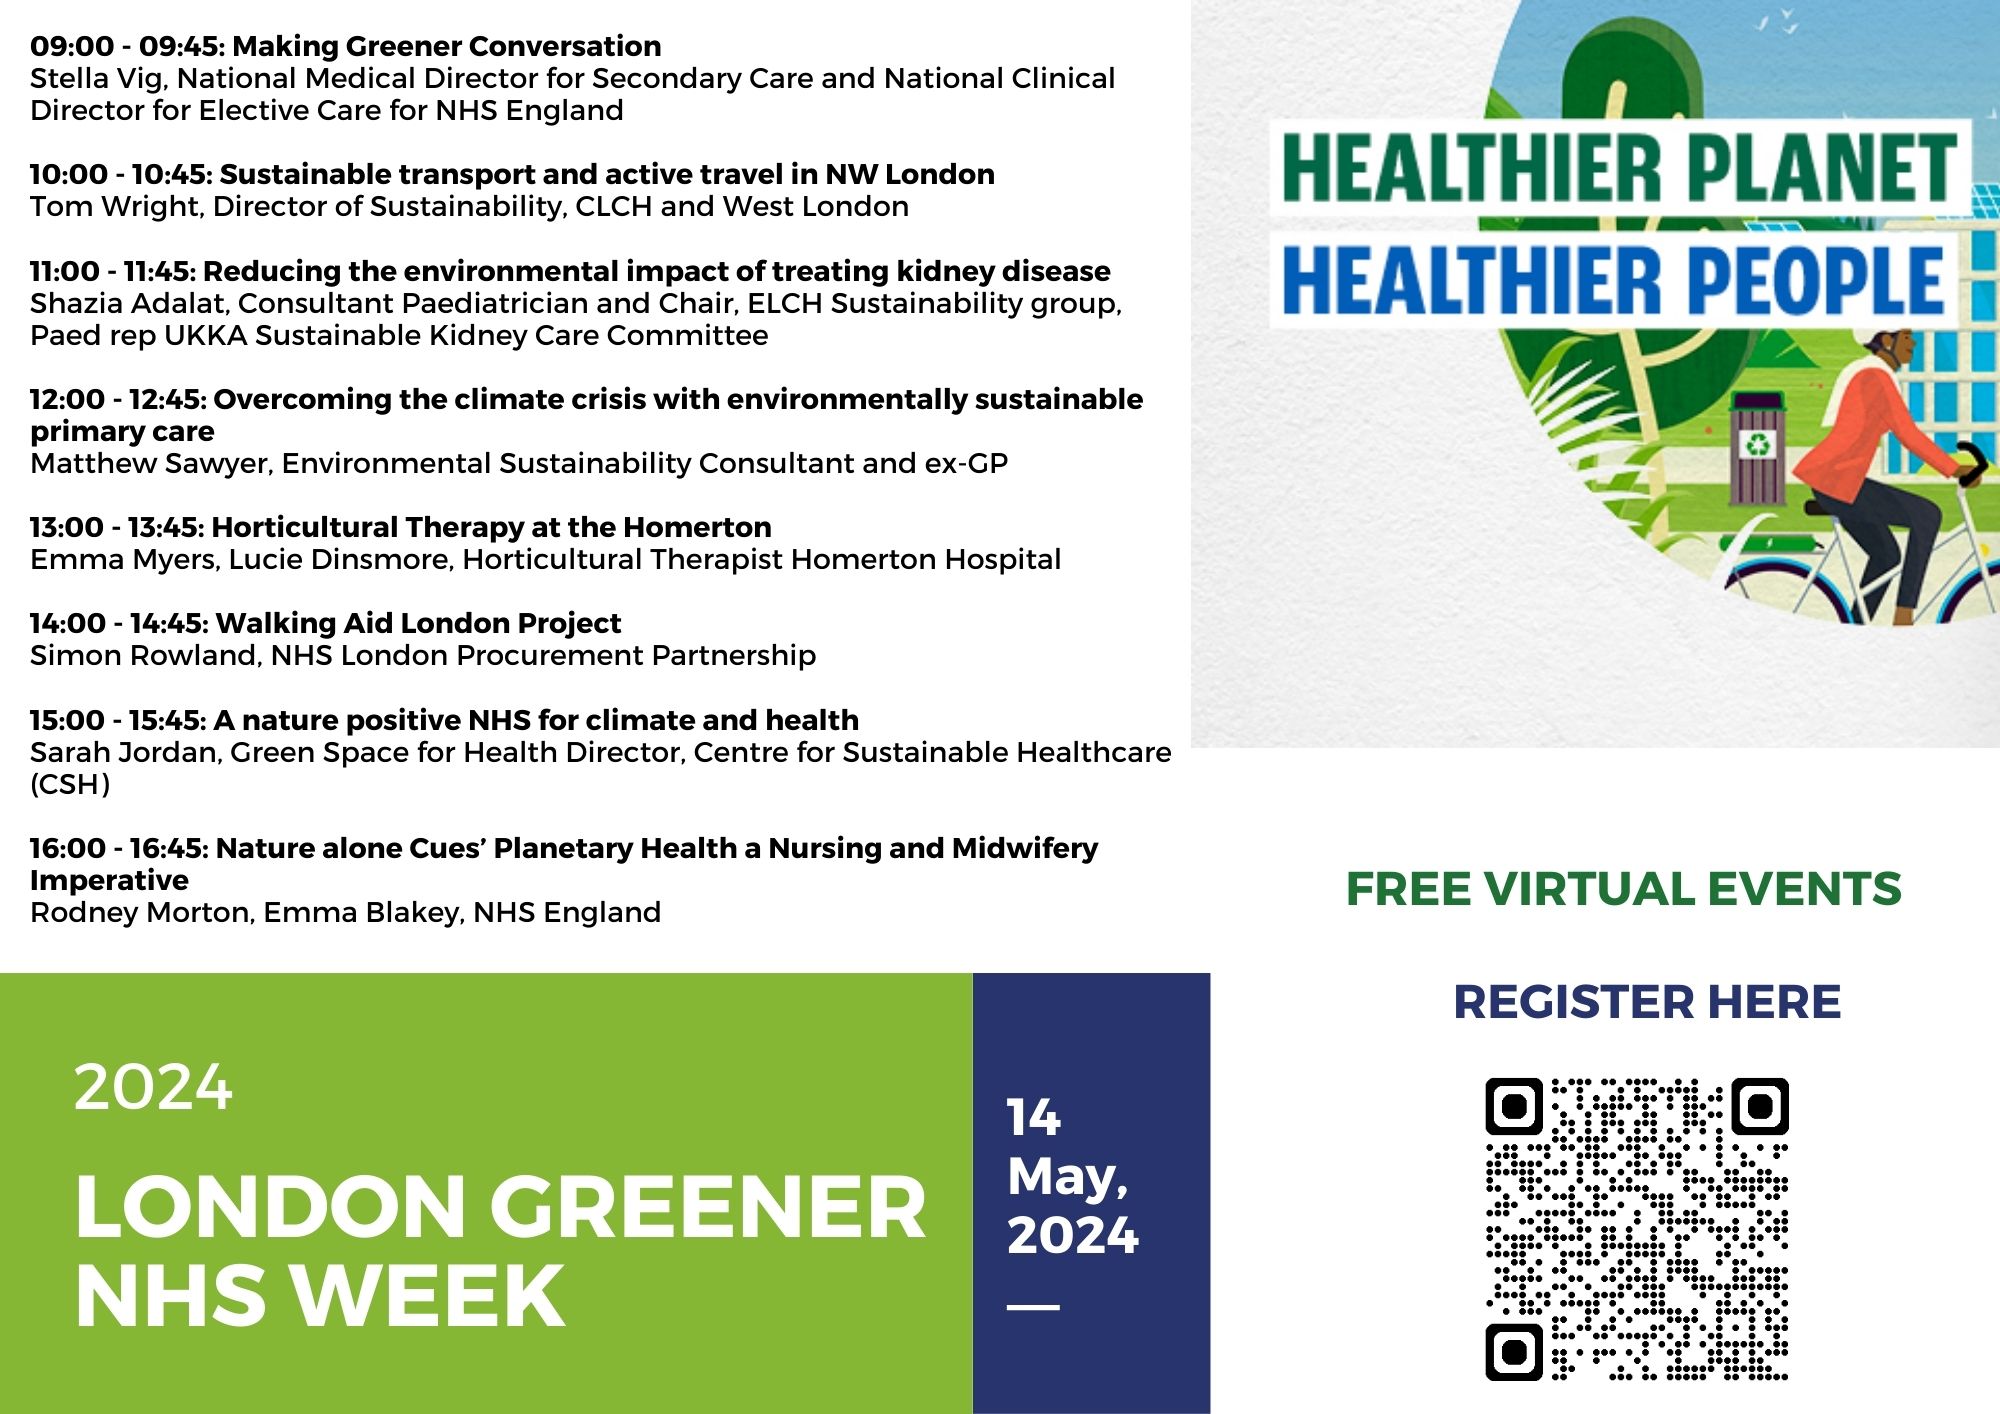 London Green Week Event - Tuesday 14 May 2024